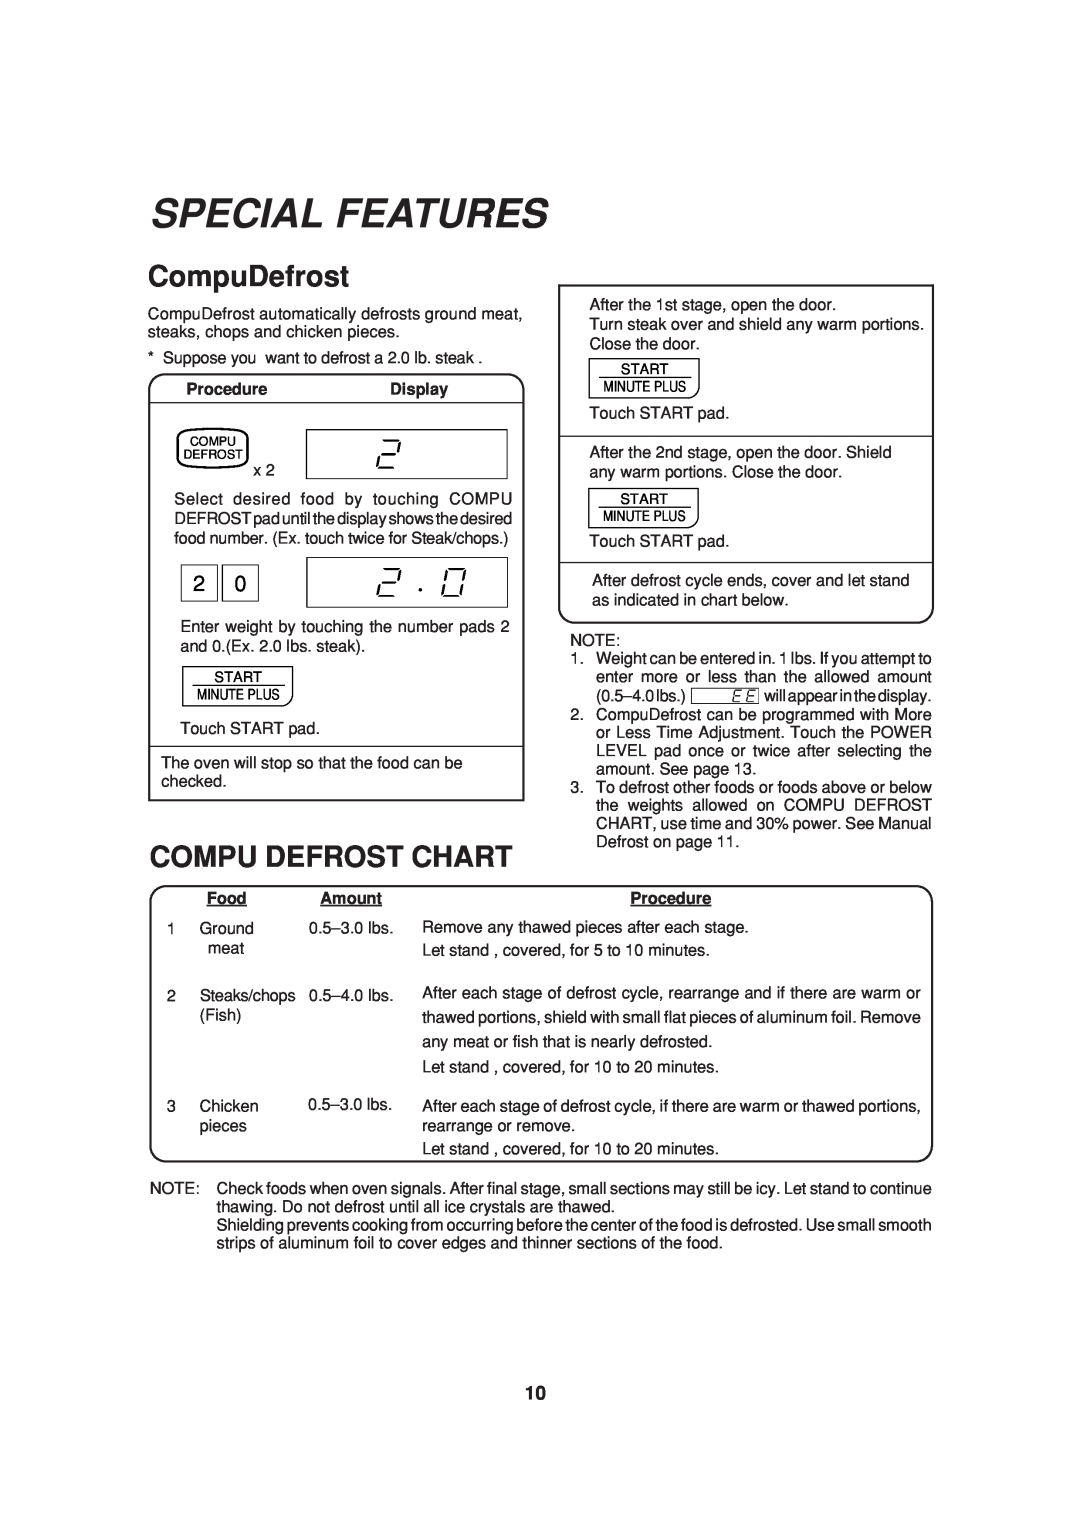 Sharp R-312A, R-305A, R-308A, R-309B, R-310A, R-305B operation manual Special Features, CompuDefrost, Compu Defrost Chart 